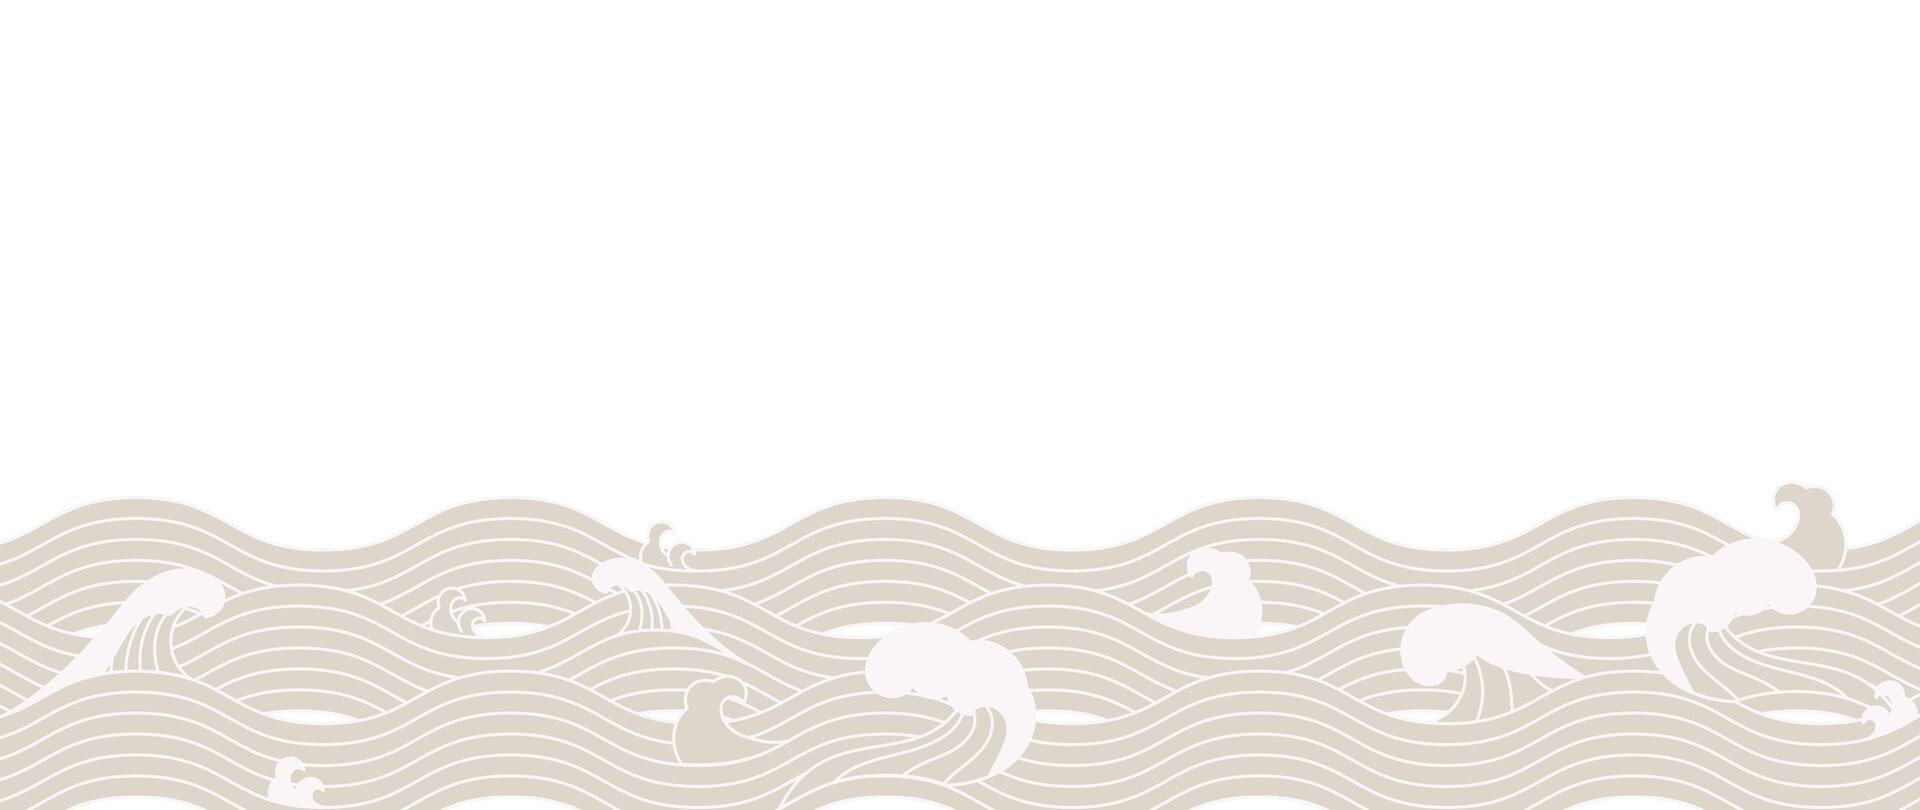 Japanese sea wave background vector. Wallpaper design with beige and white ocean wave pattern backdrop. Modern luxury oriental illustration for cover, banner, website, decor, border. vector